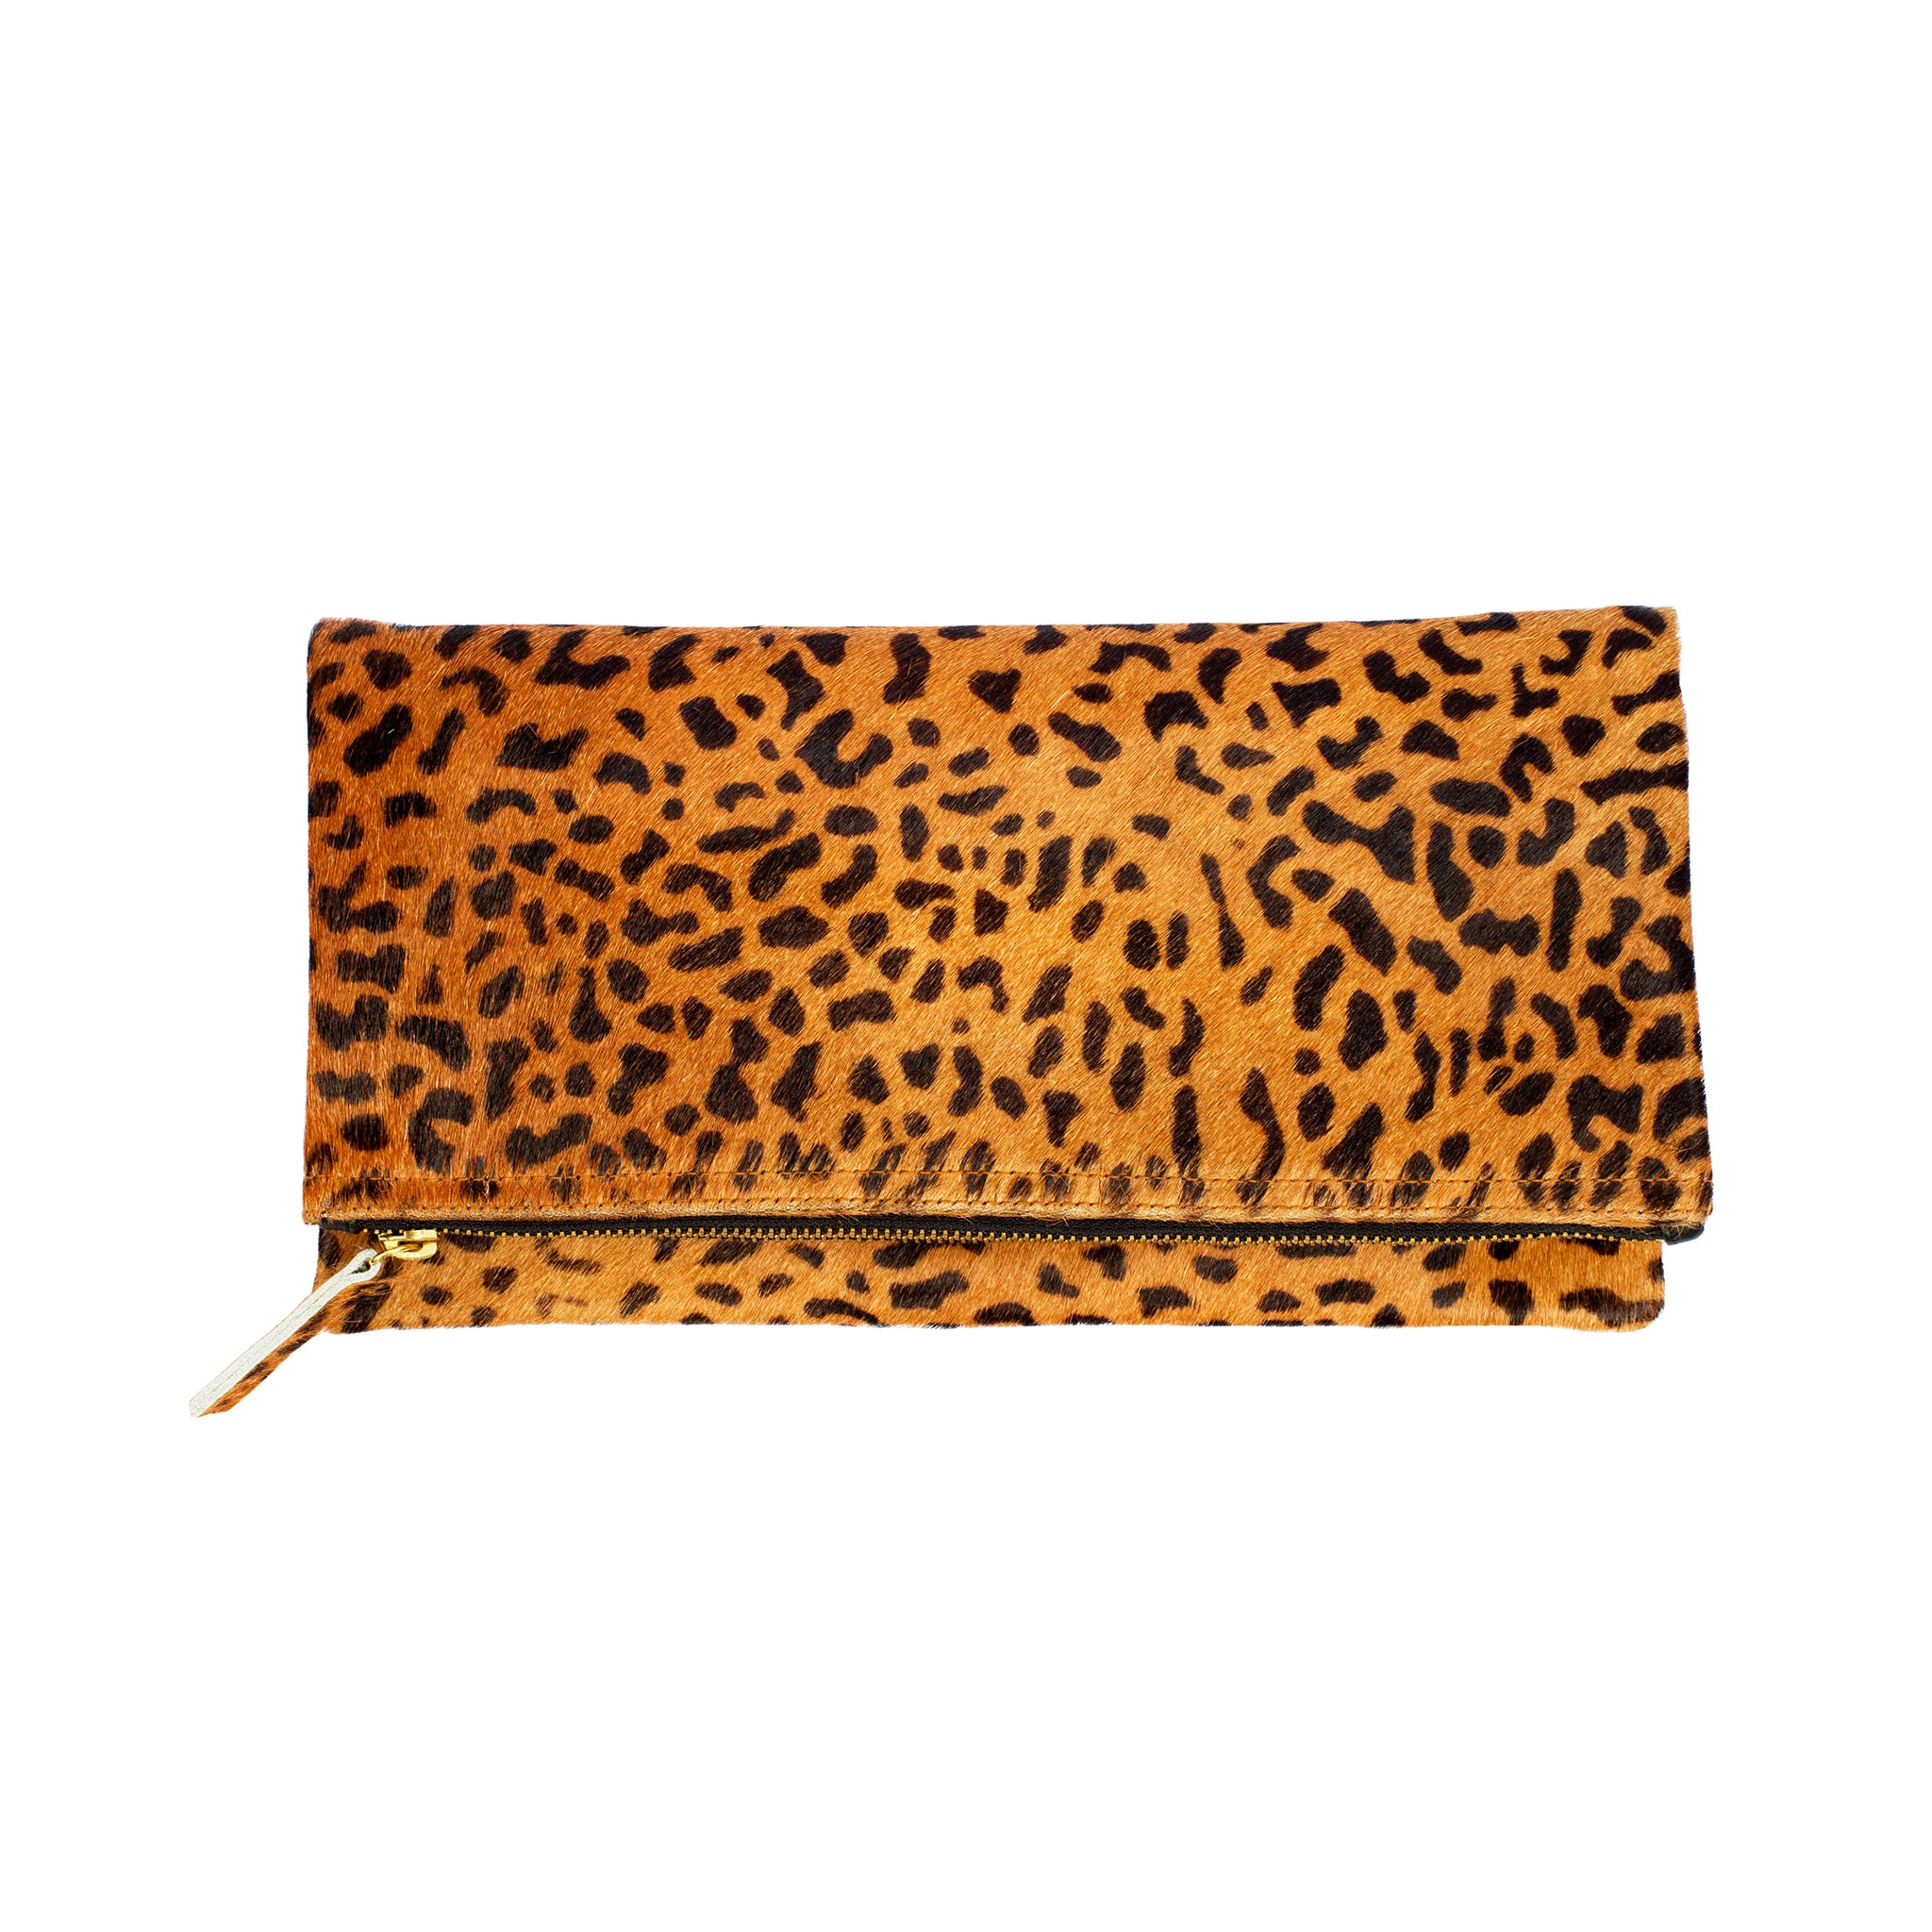 Exclusive Leopard Leather Clutch